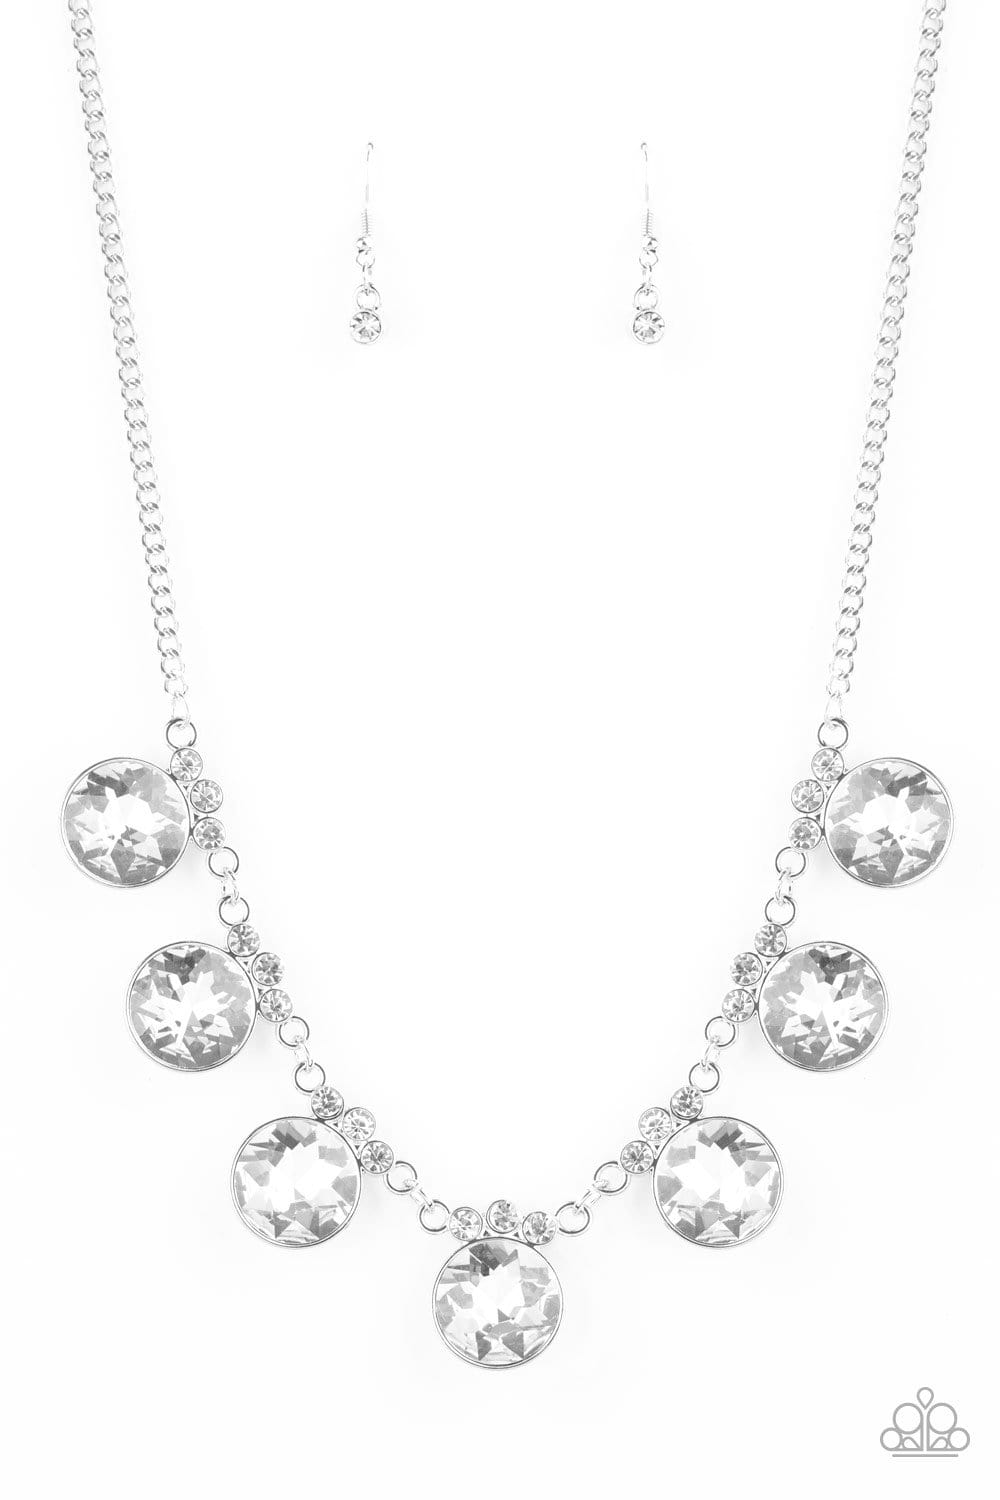 Paparazzi GLOW-Getter Glamour Necklace